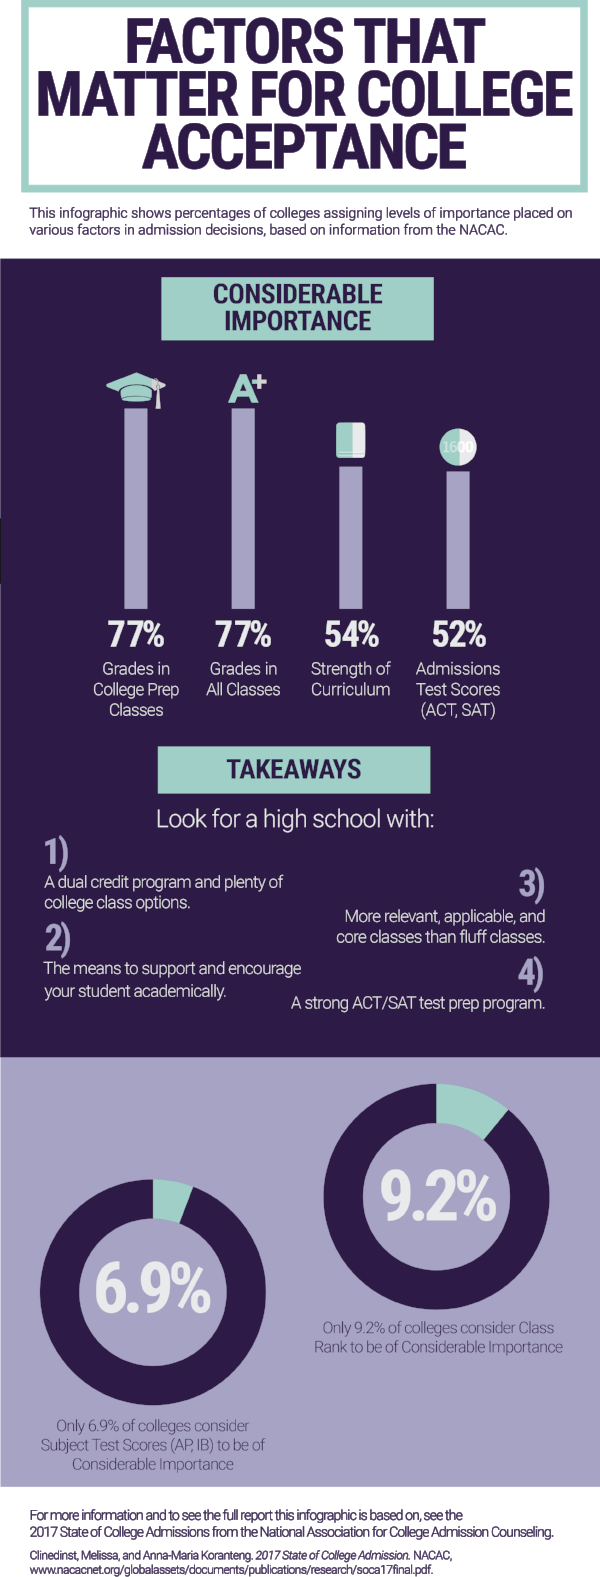 Infographic: What factors matter for college acceptance?